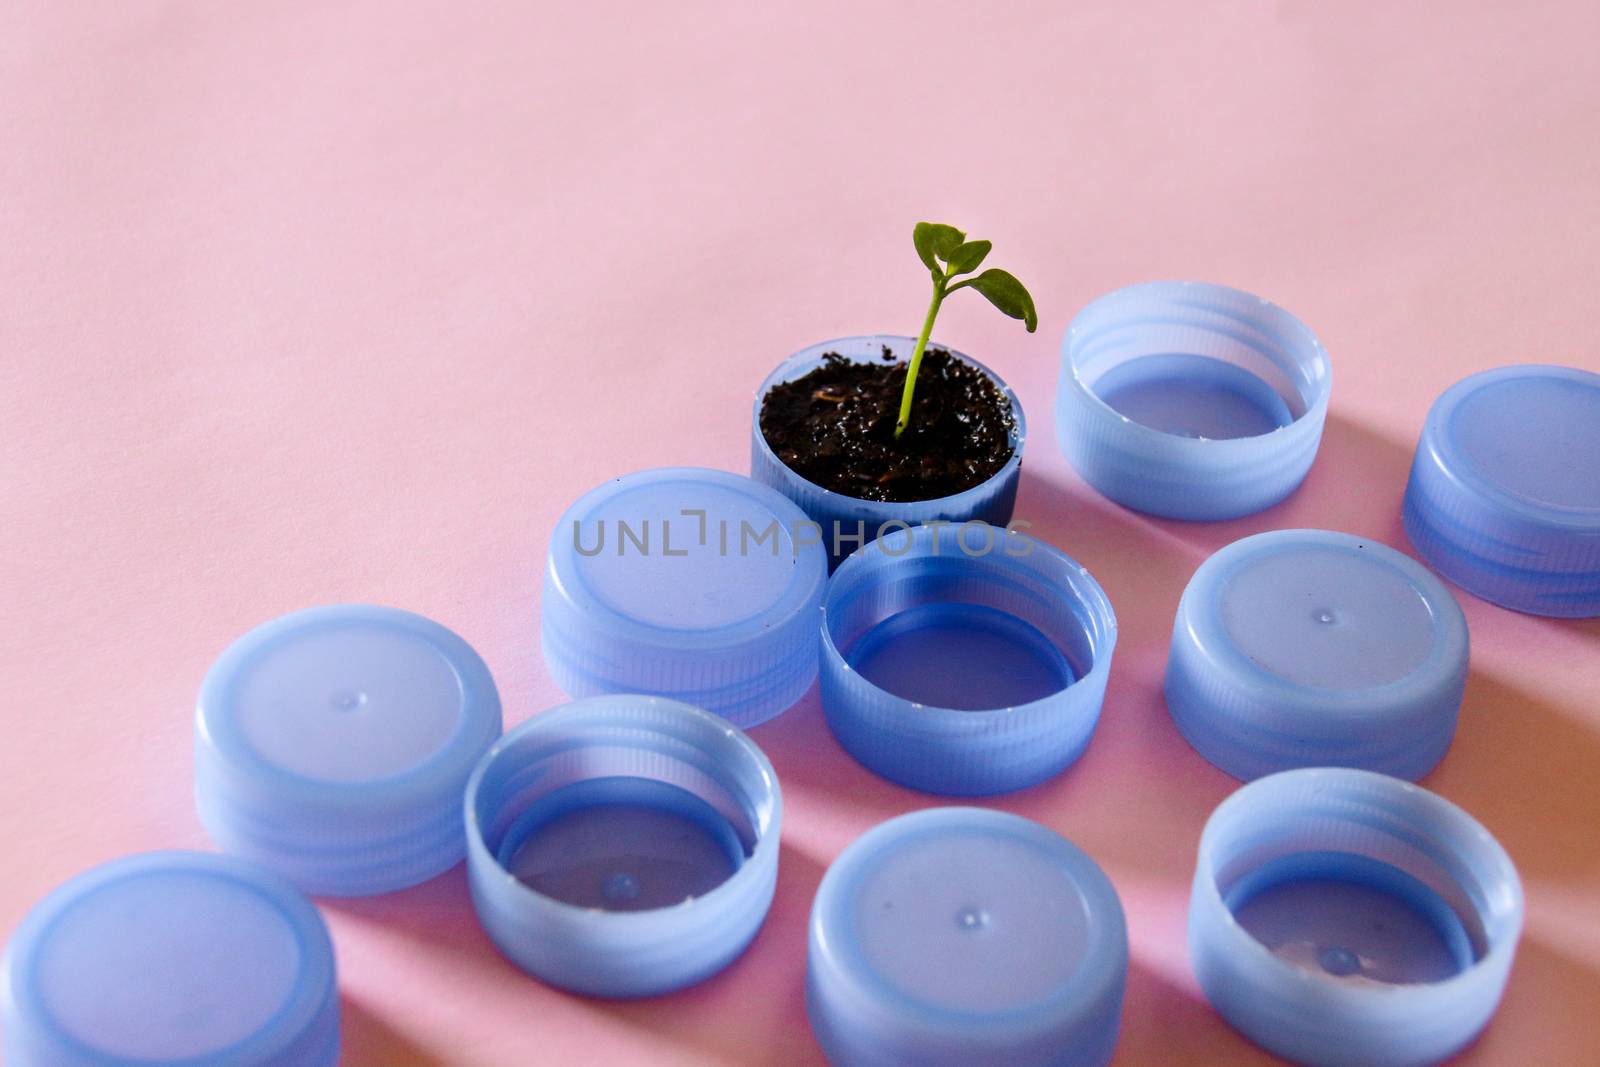 Seedling growing out among plastic bottle caps by Sonnet15